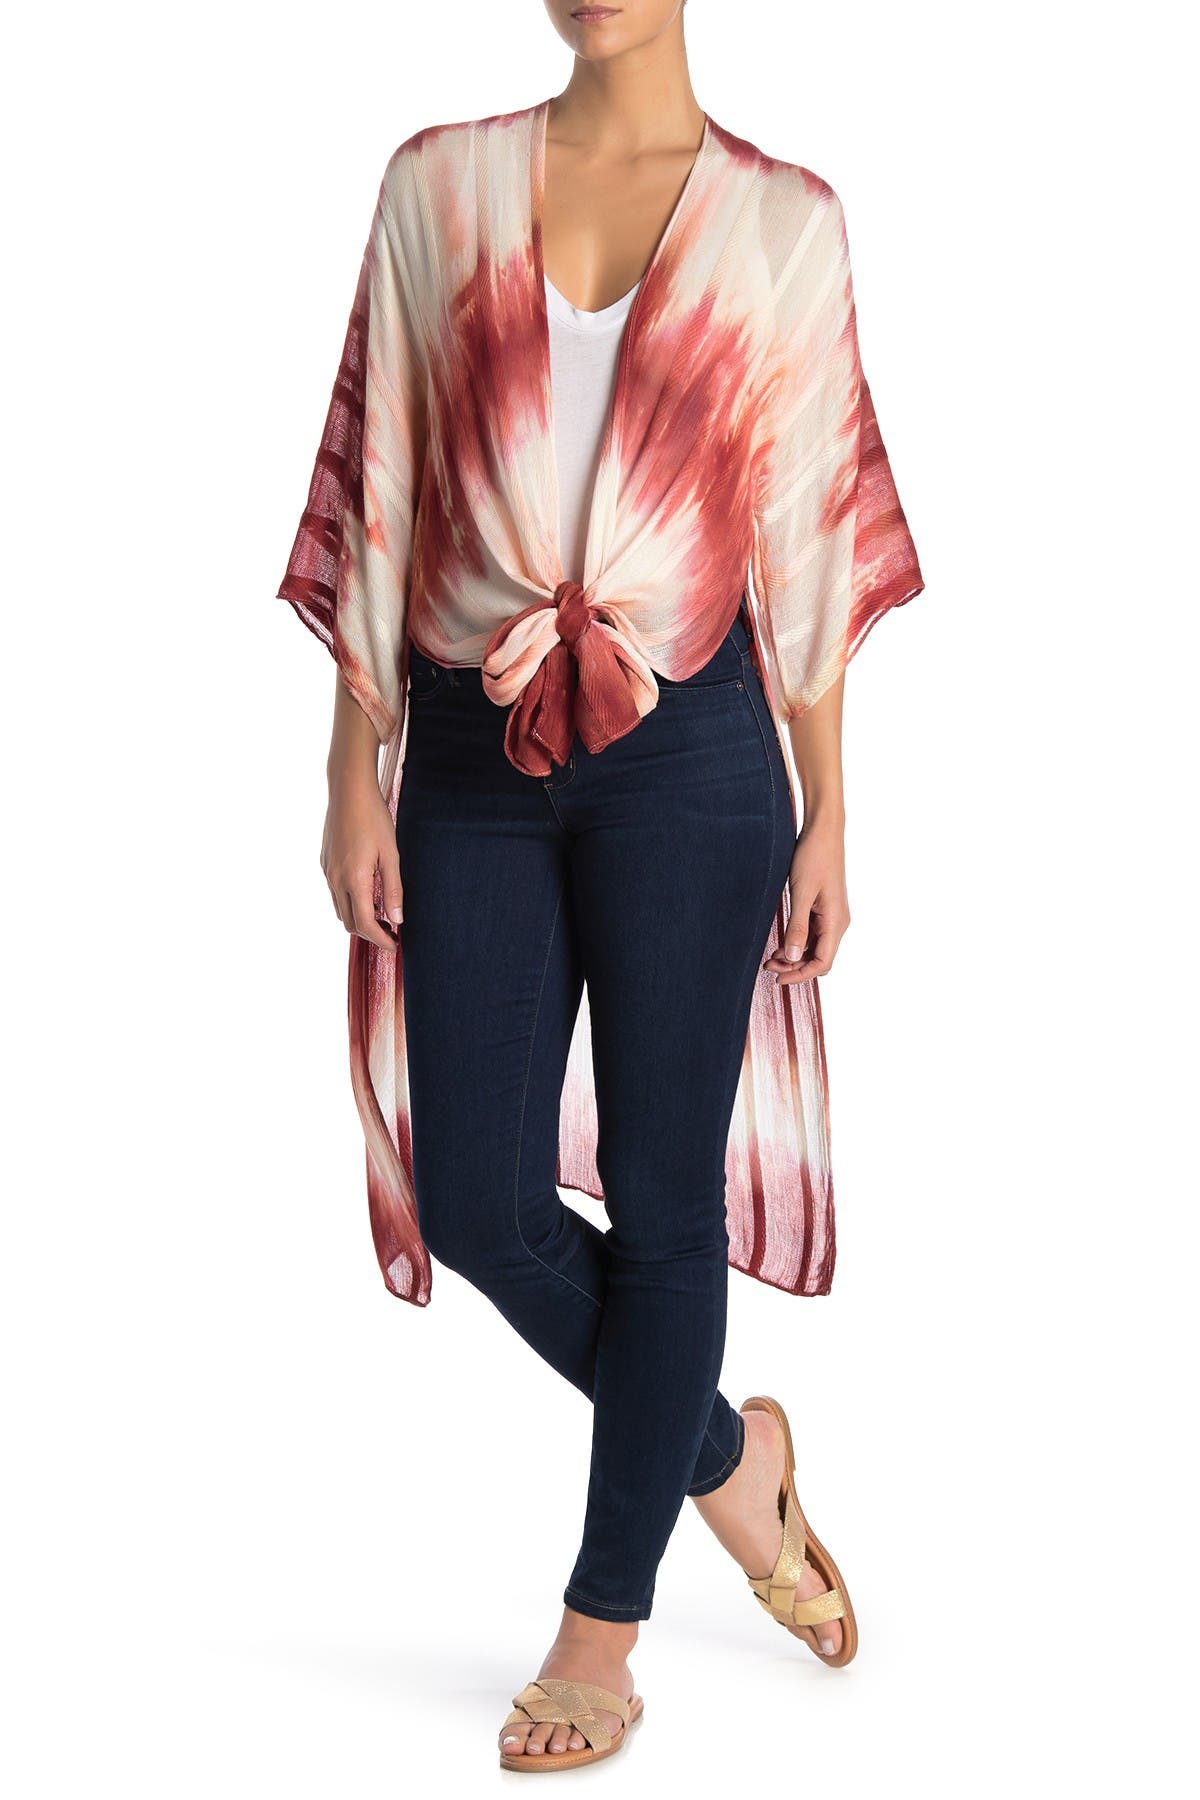 Melrose And Market Tie Dye 3/4 Sleeve Ruana Duster In Red Combo